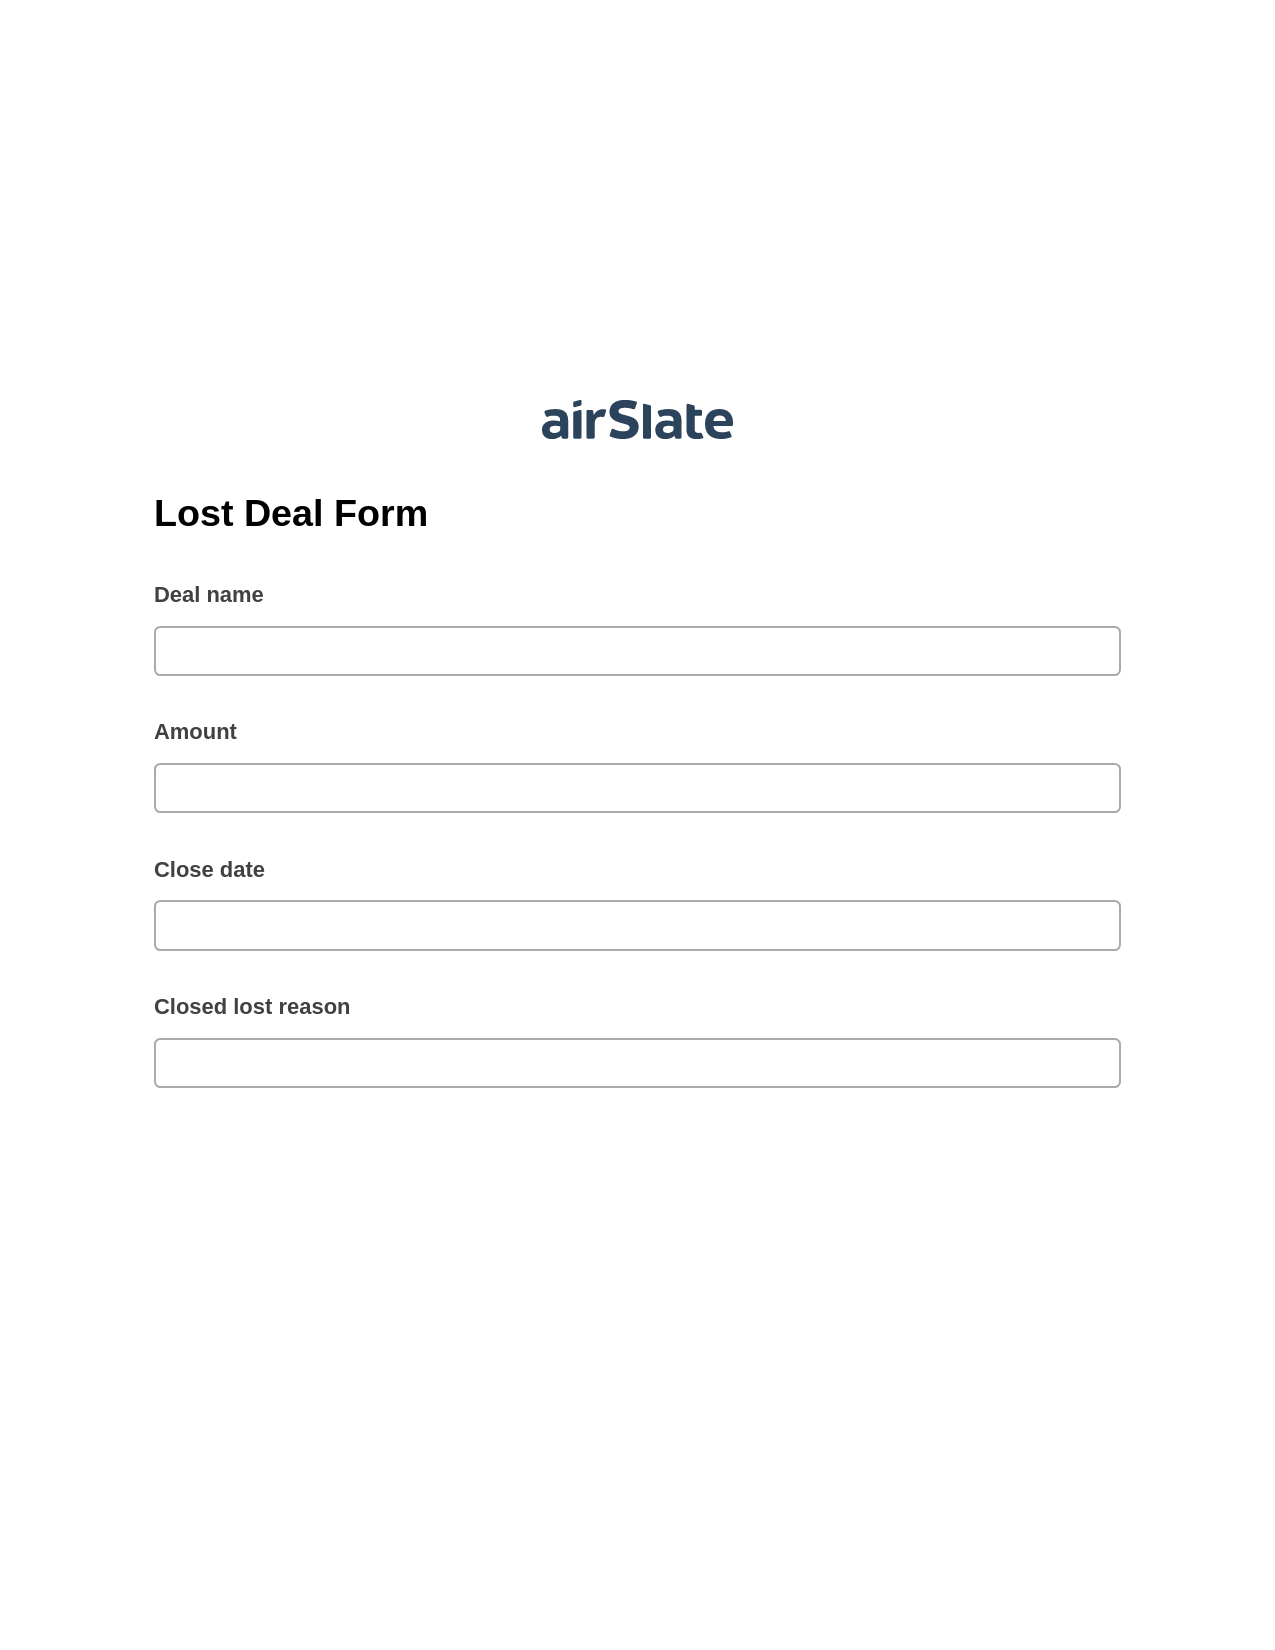 Lost Deal Form Pre-fill from MySQL Bot, Webhook Bot, Archive to SharePoint Folder Bot